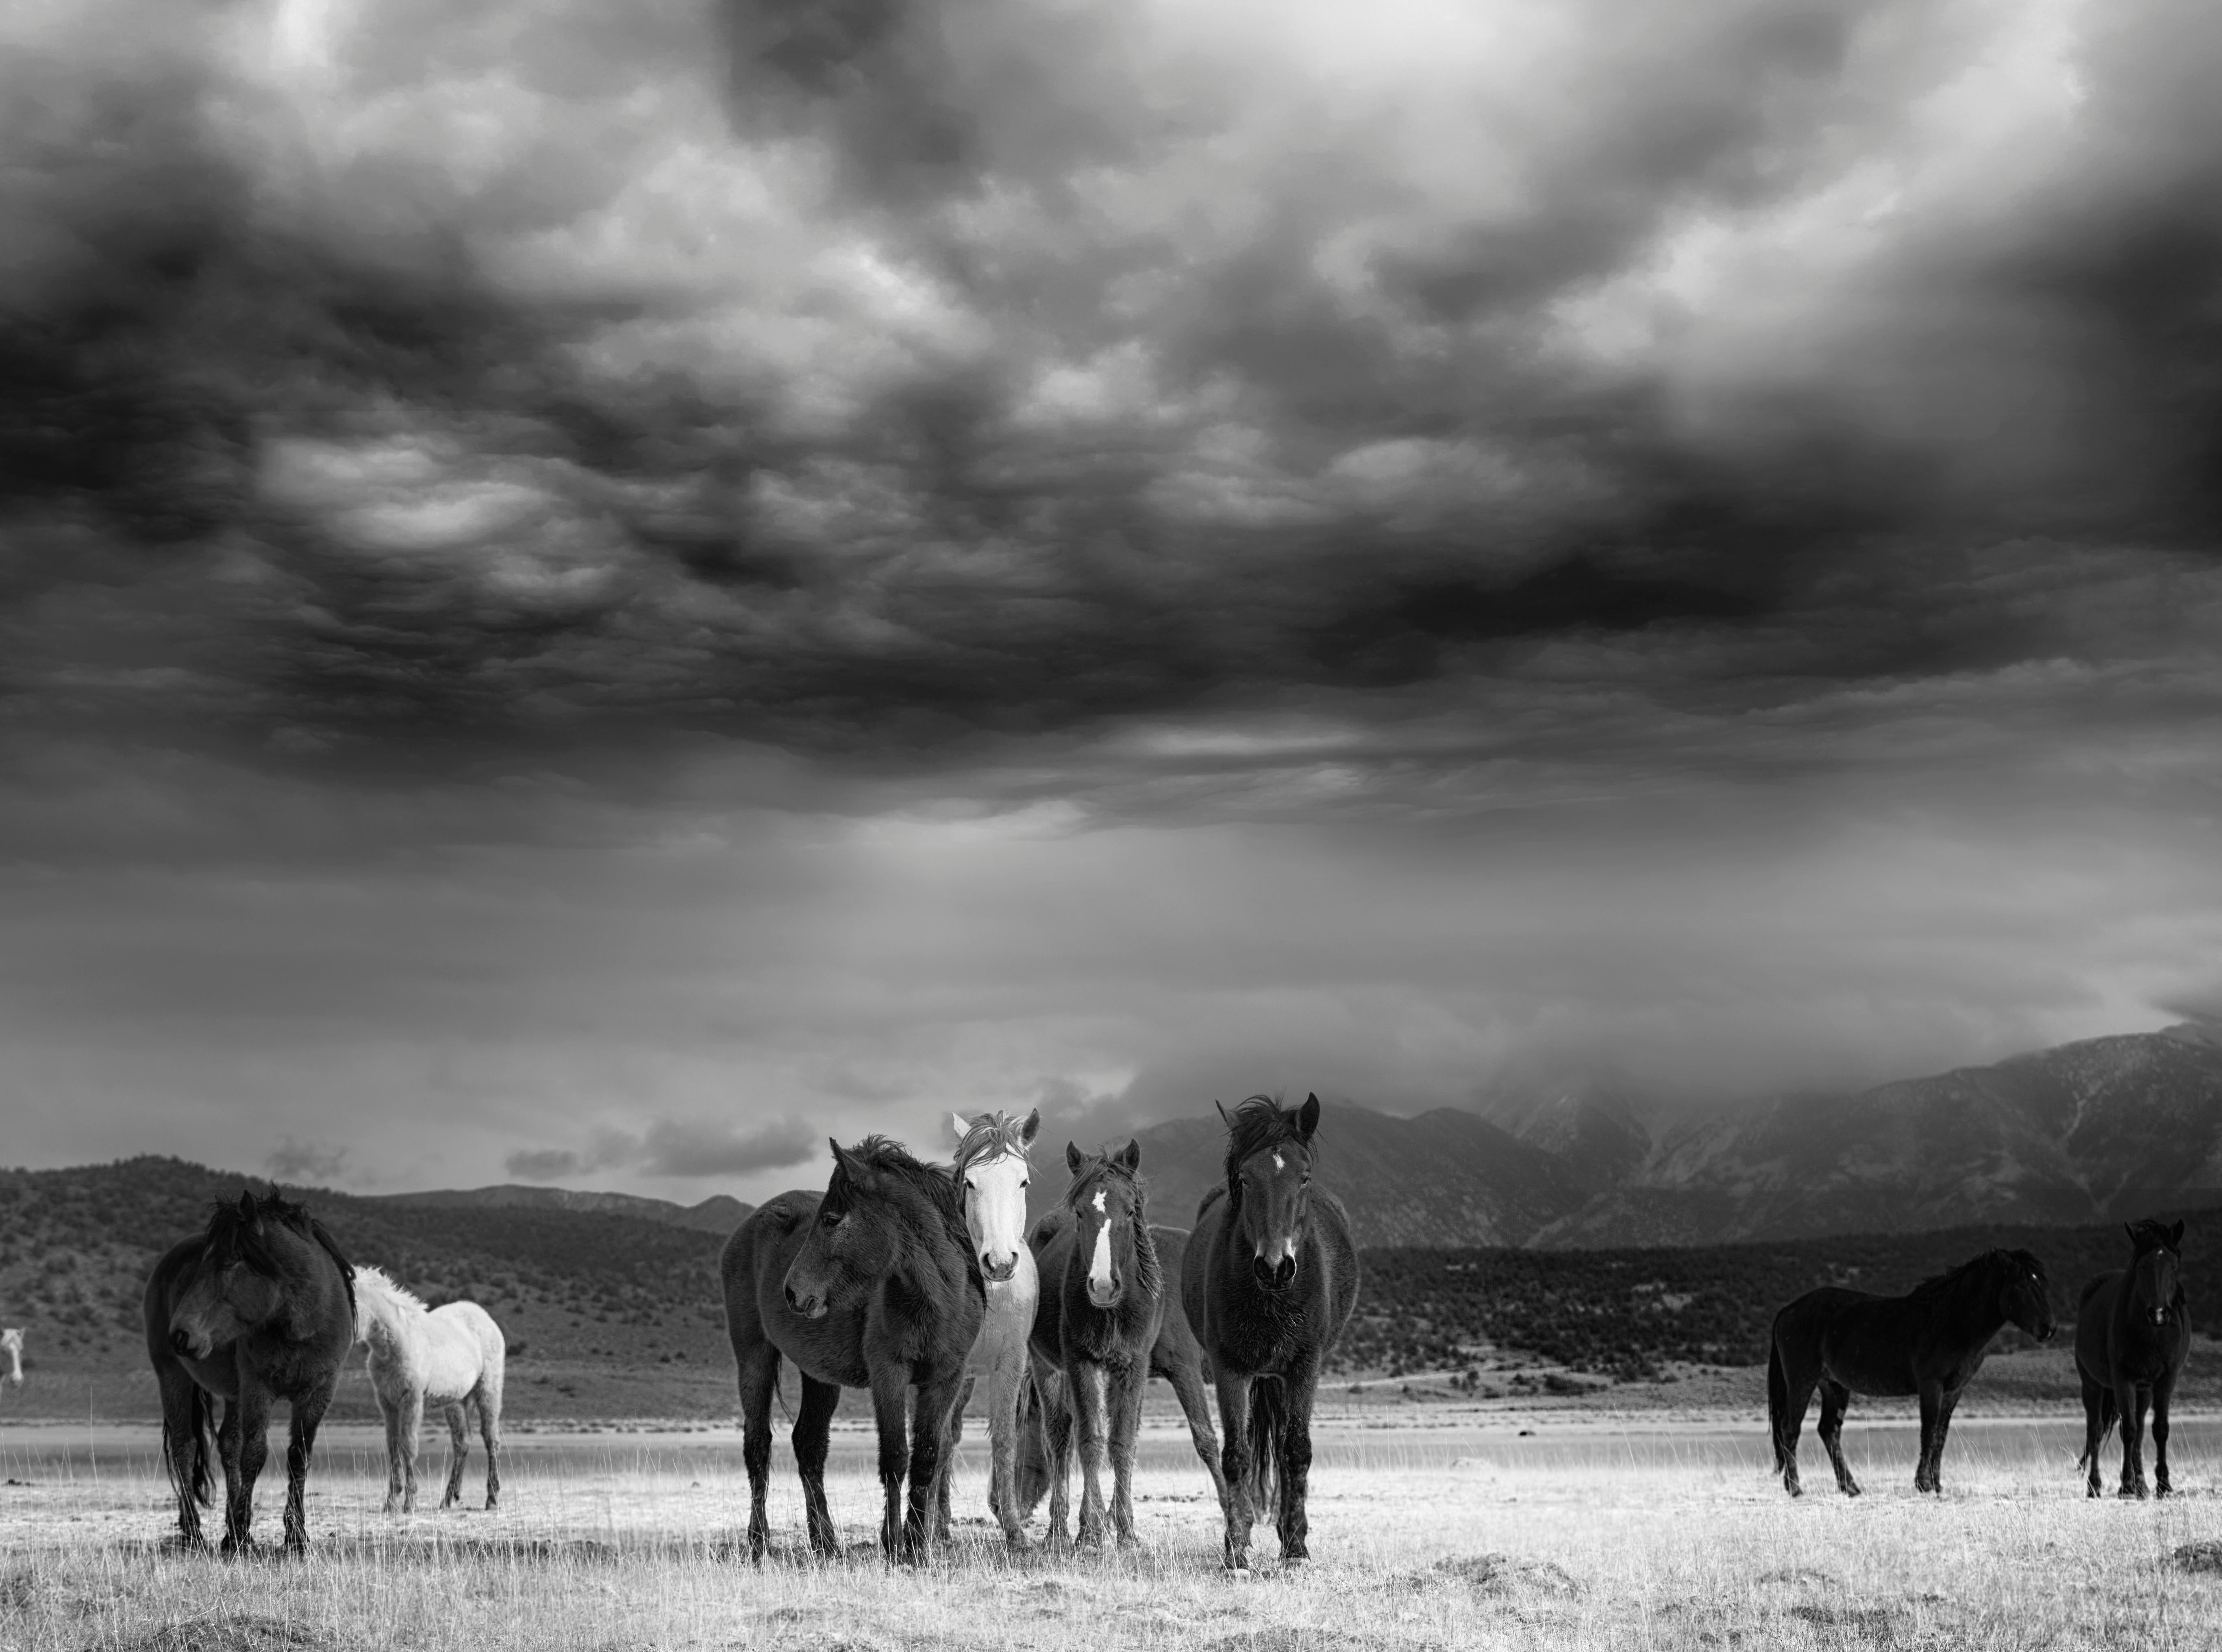 This is a contemporary black and white photograph of American Wild Mustangs. 
"They represent the ultimate expression of American freedom" - Wild Horses
Printed in archival luster paper w archival inks
Unsigned print

Shane Russeck has built a